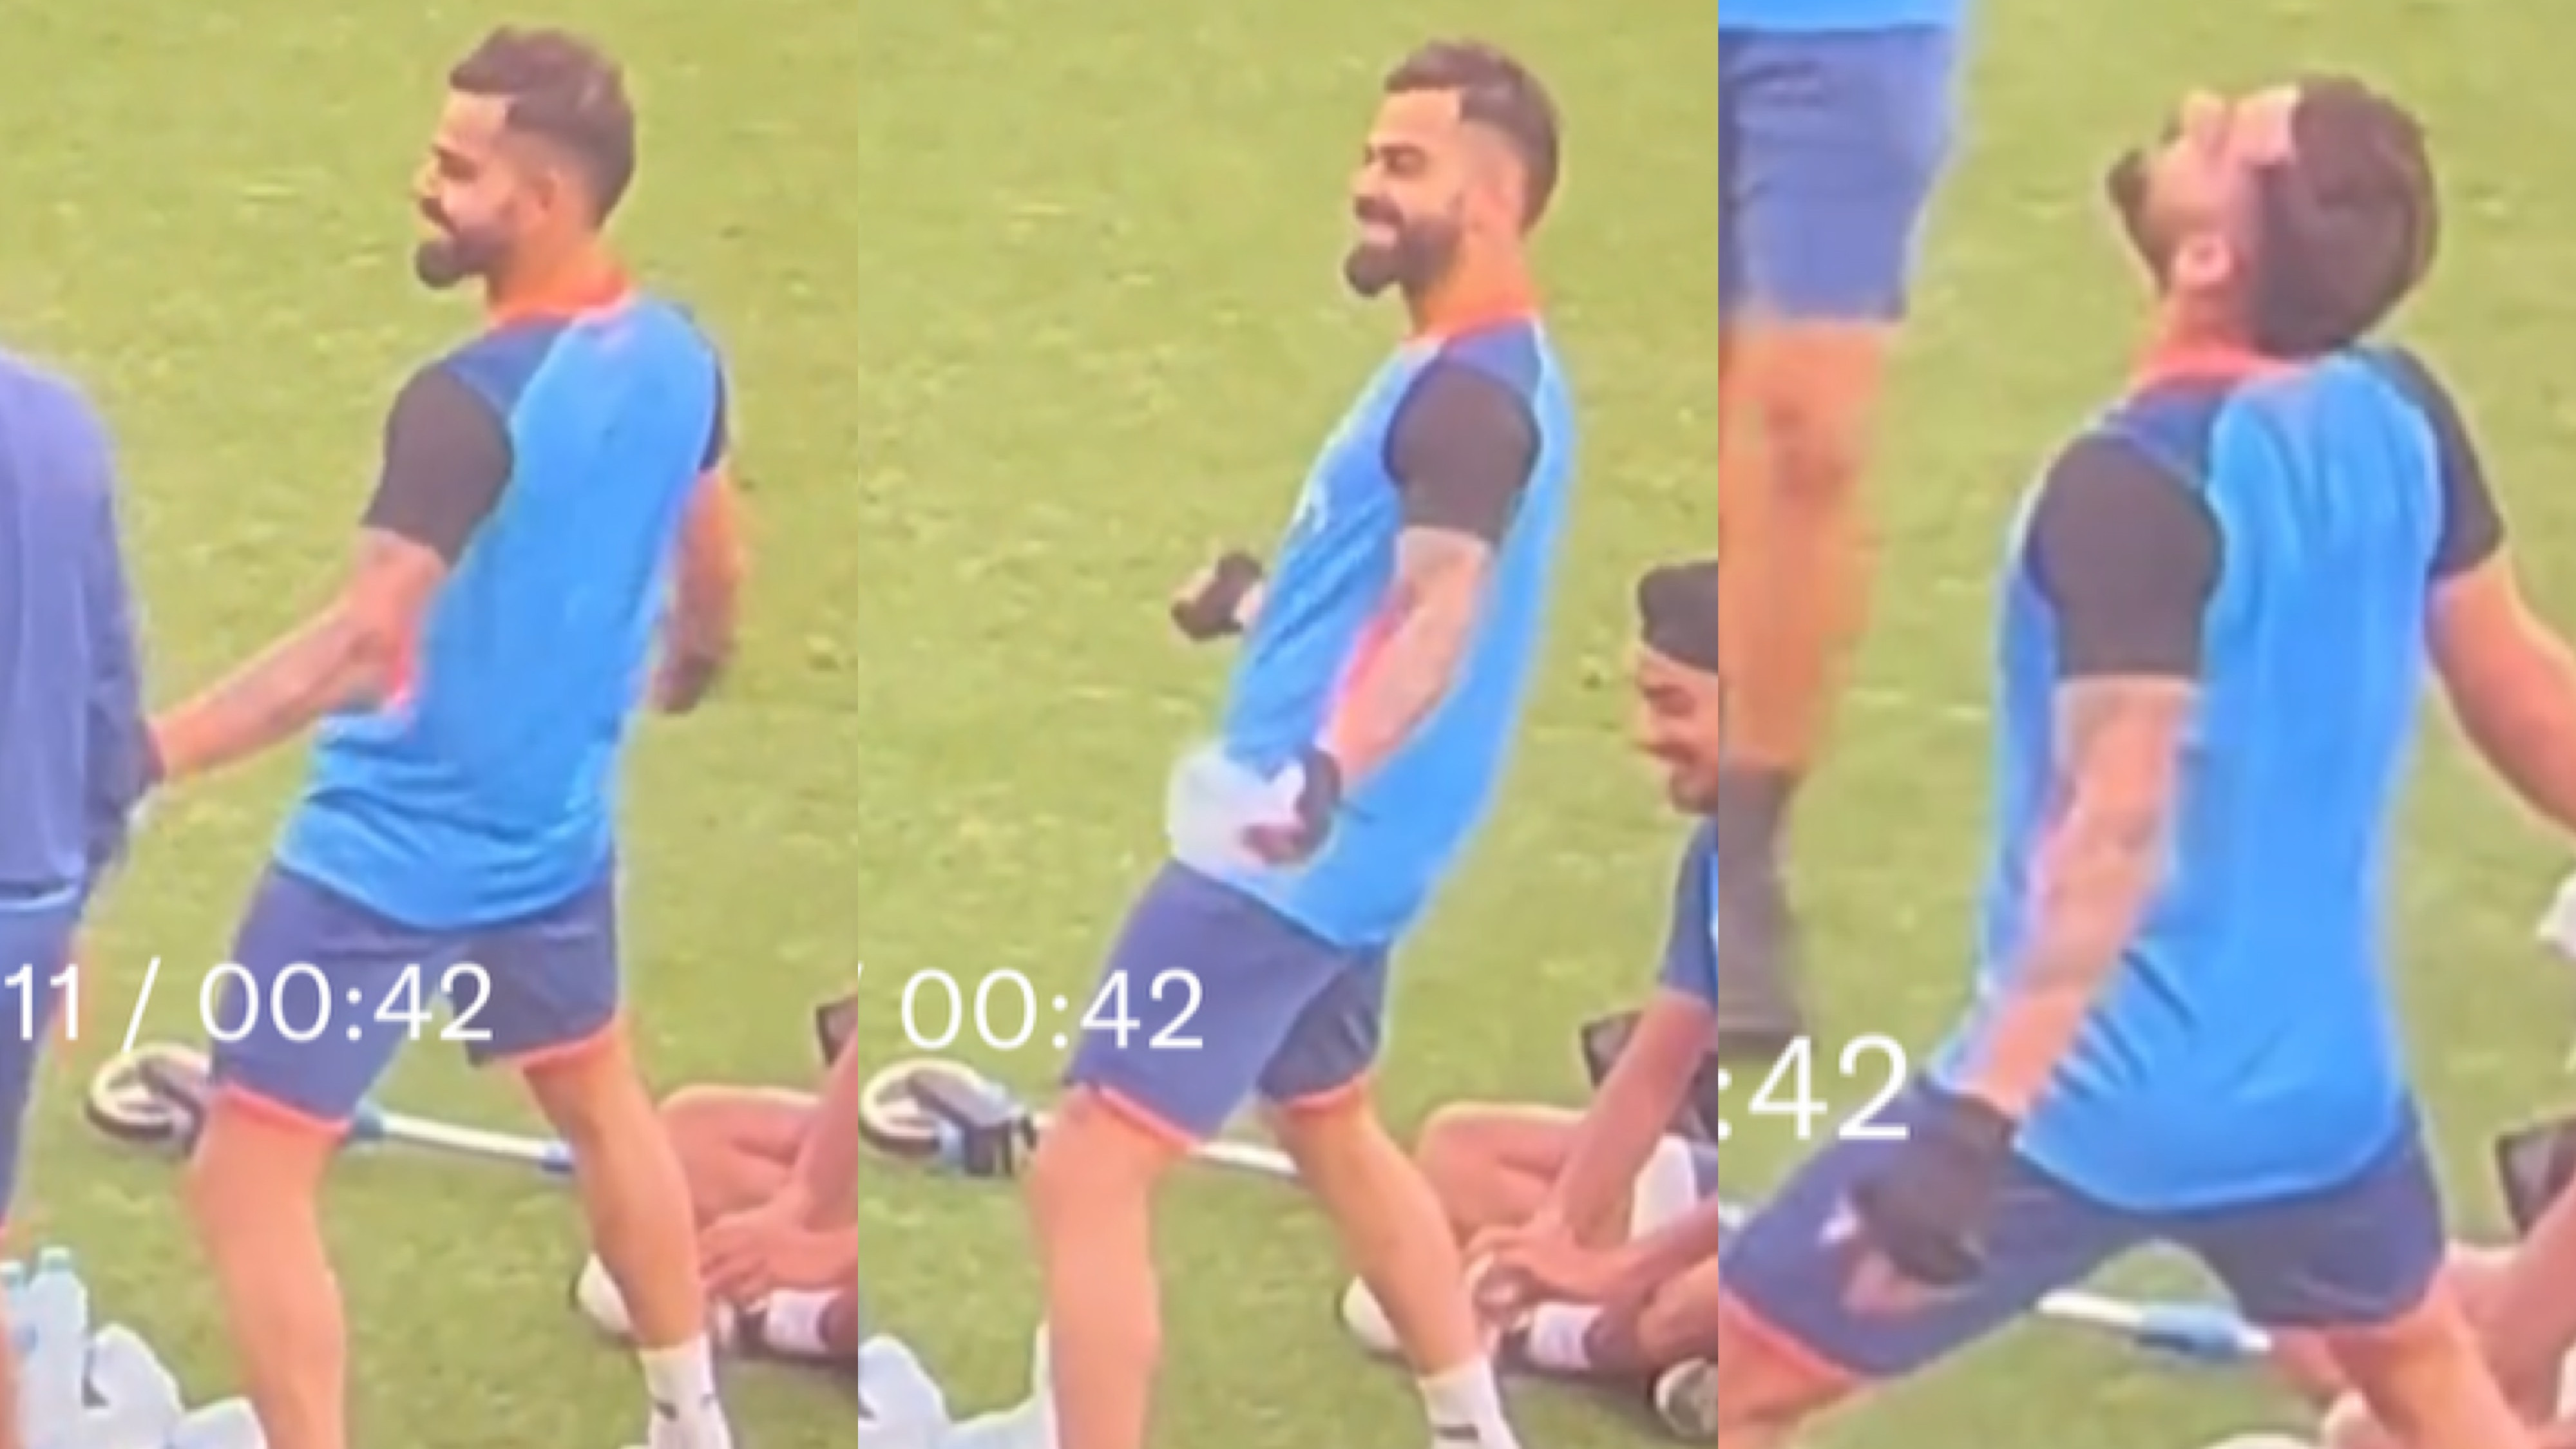 T20 World Cup 2022: WATCH - Virat Kohli shows off dance moves at practice ahead of Australia warm-up tie